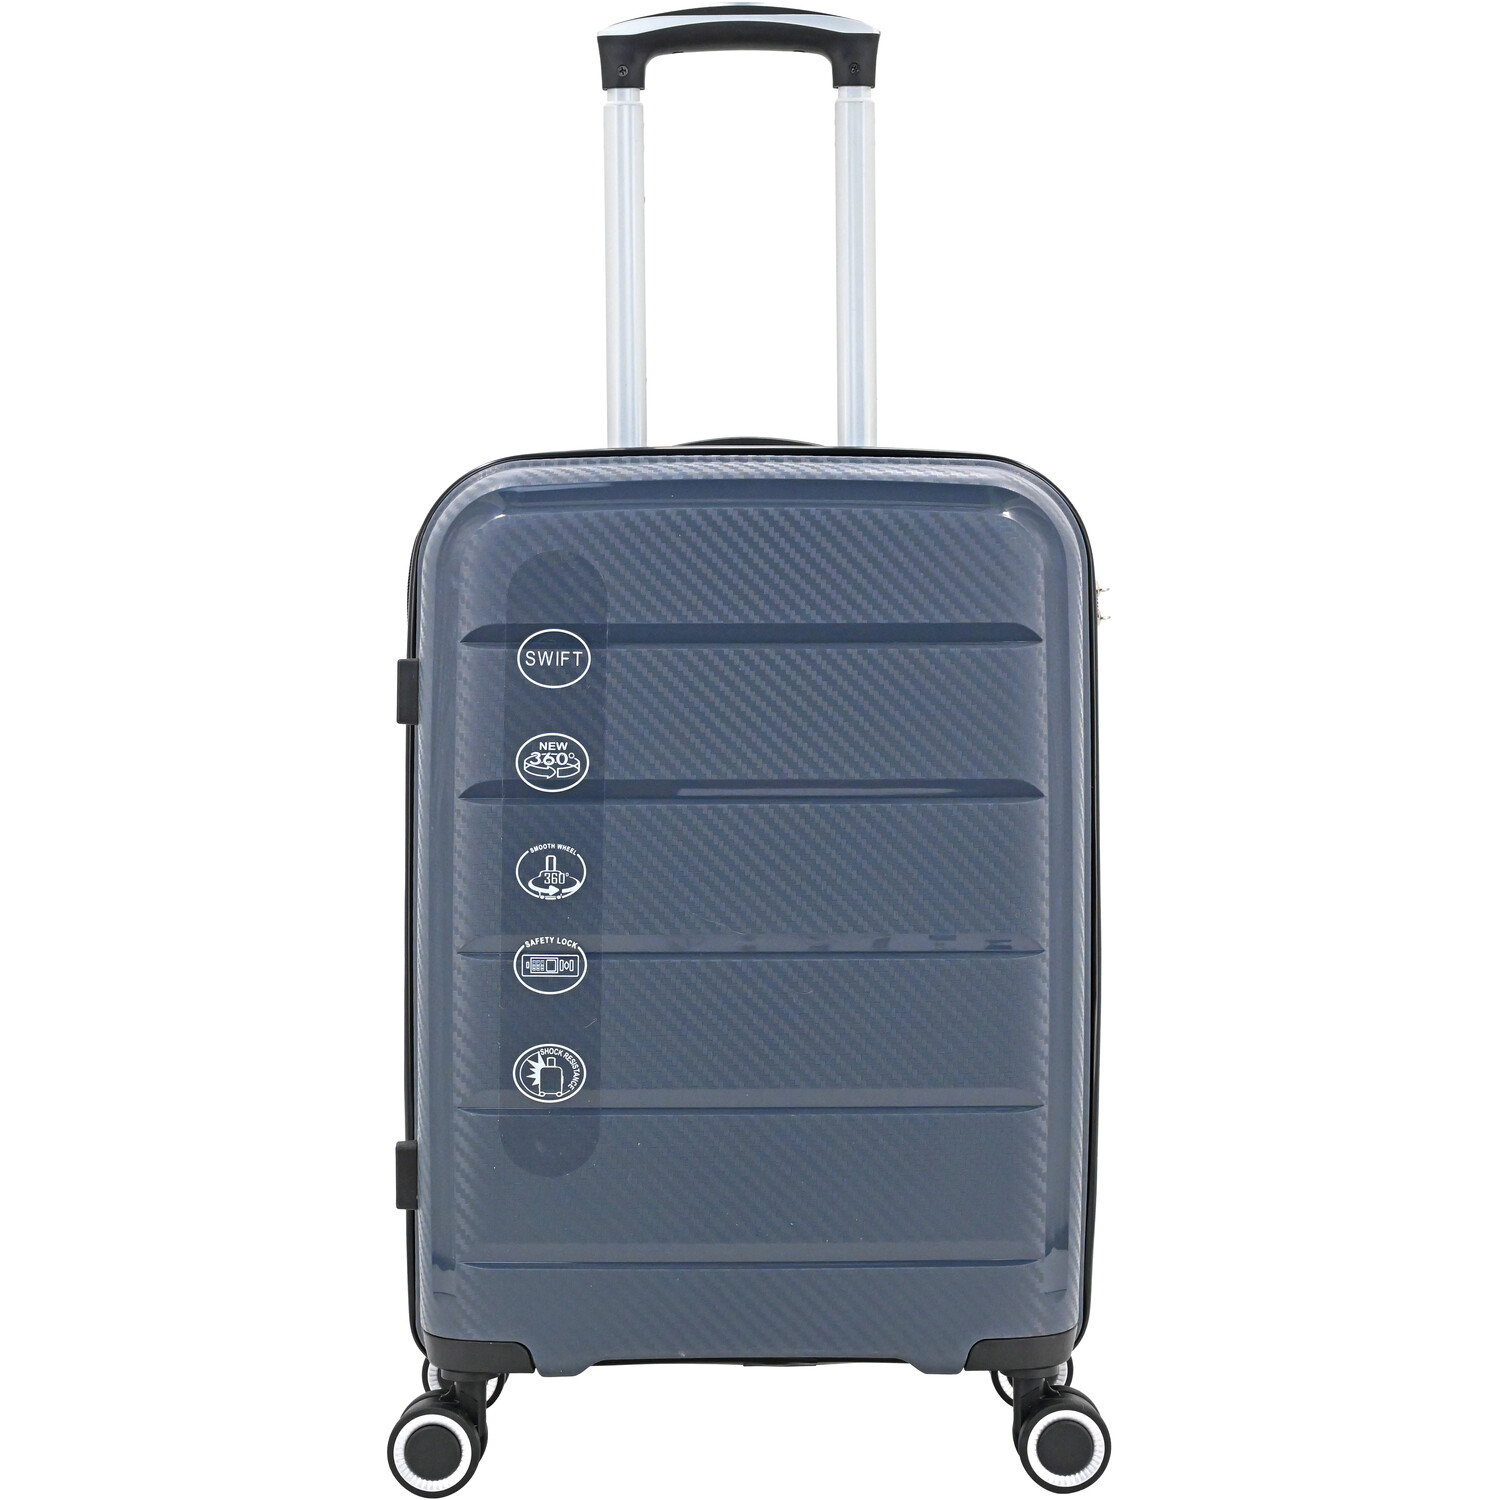 Swift Discovery Luggage Case - Grey / Cabin Case Image 1